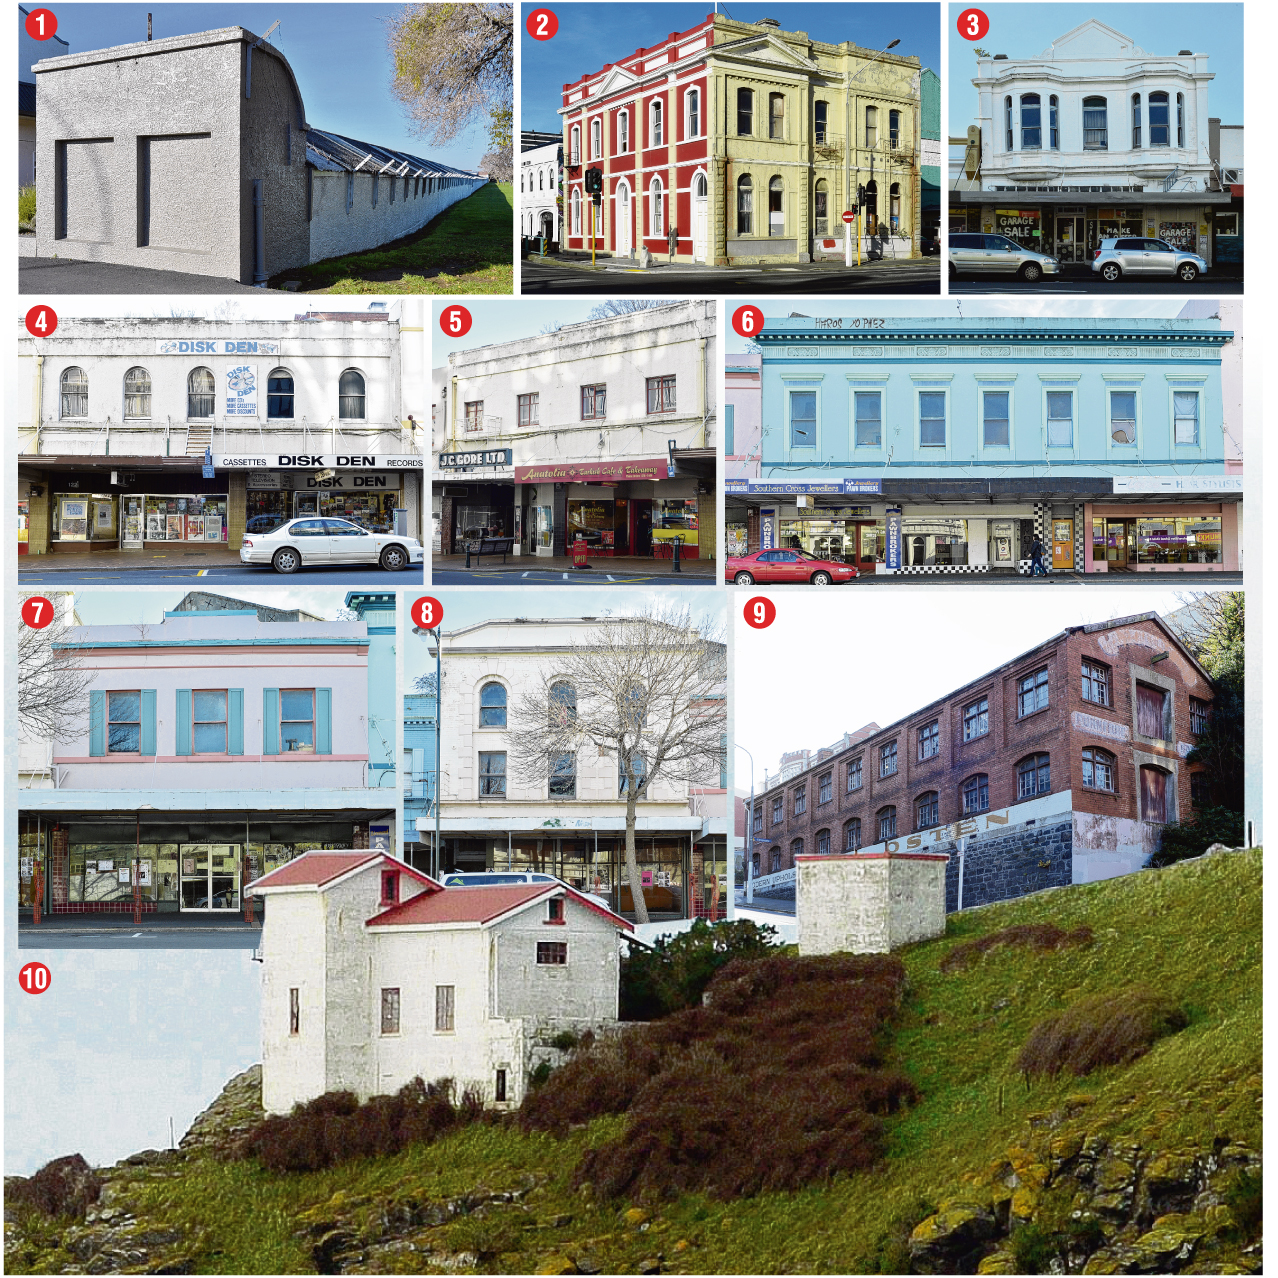 1. Donaghy’s Rope Walk. 2. The former Otago Education Board Offices on the corner of Jetty and Crawford  Sts. 3. 148 King Edward St. 4. 118-122 Princes St. 5. 126 Princes St. 6. 378 Princes St. 7. 380 Princes St. 8. 386 Princes  St. 9. 232 Rattray St. 10.